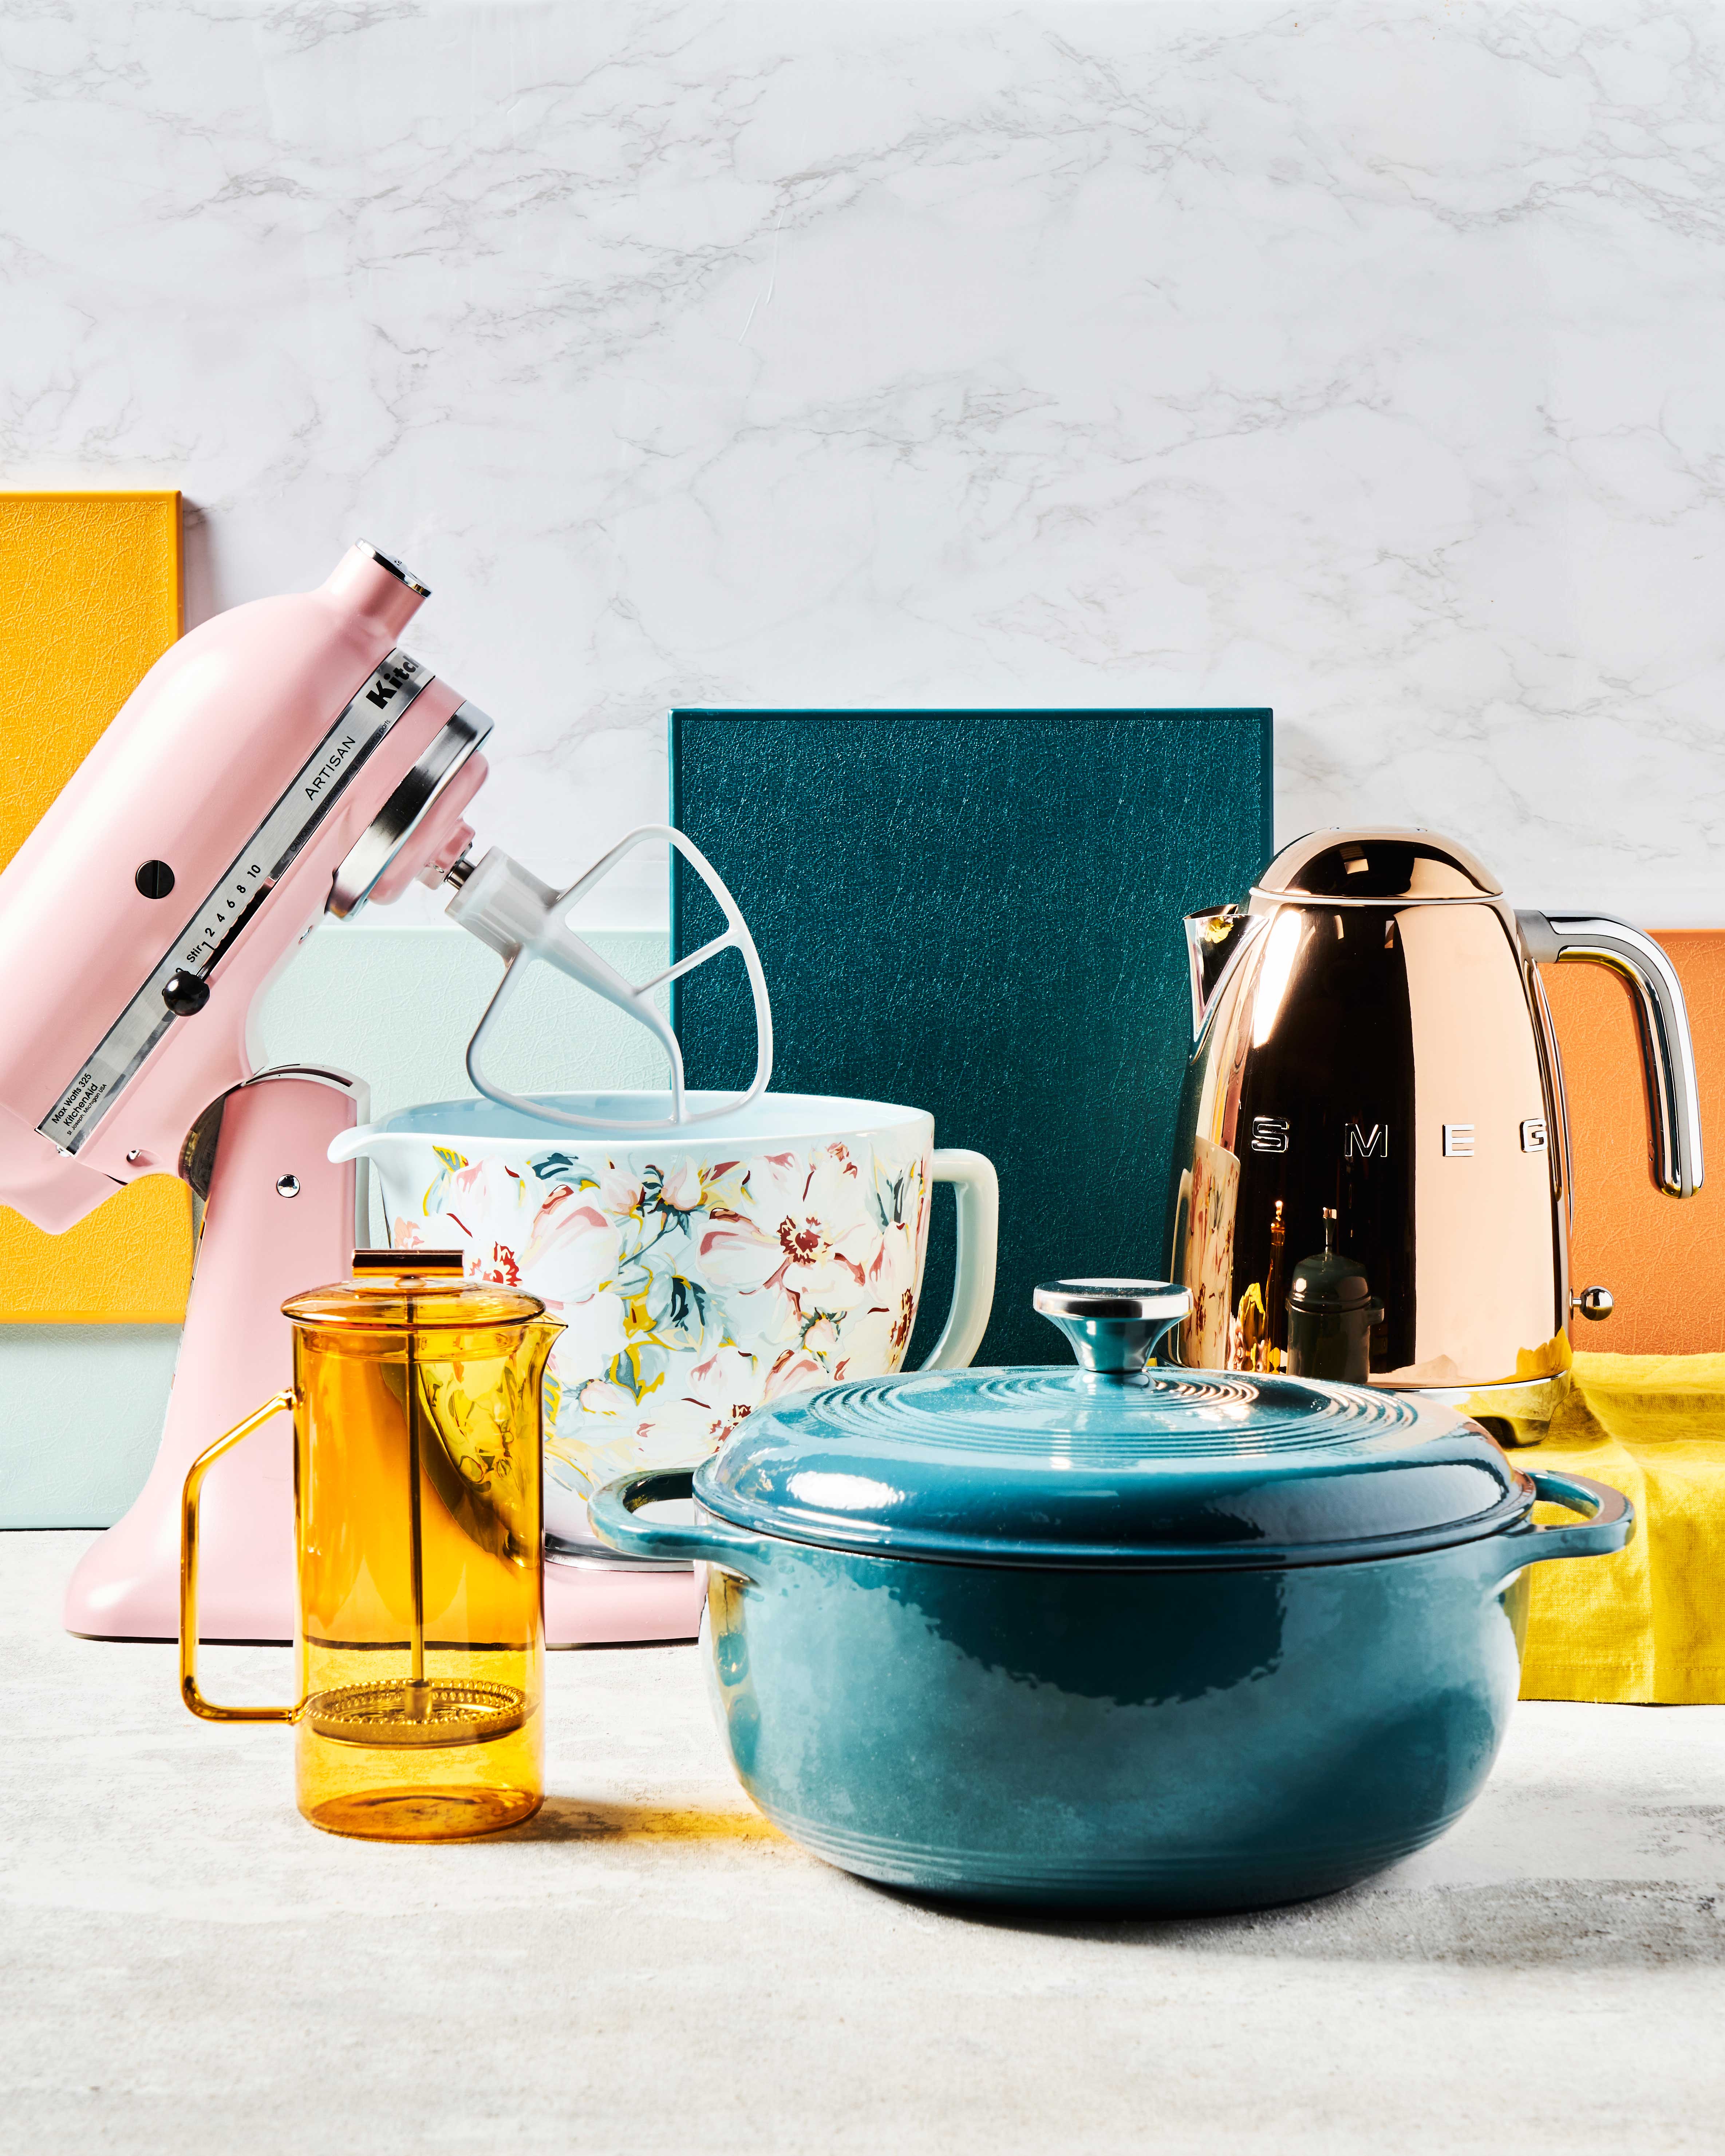 Colorful Kitchen Appliances That Stand Out